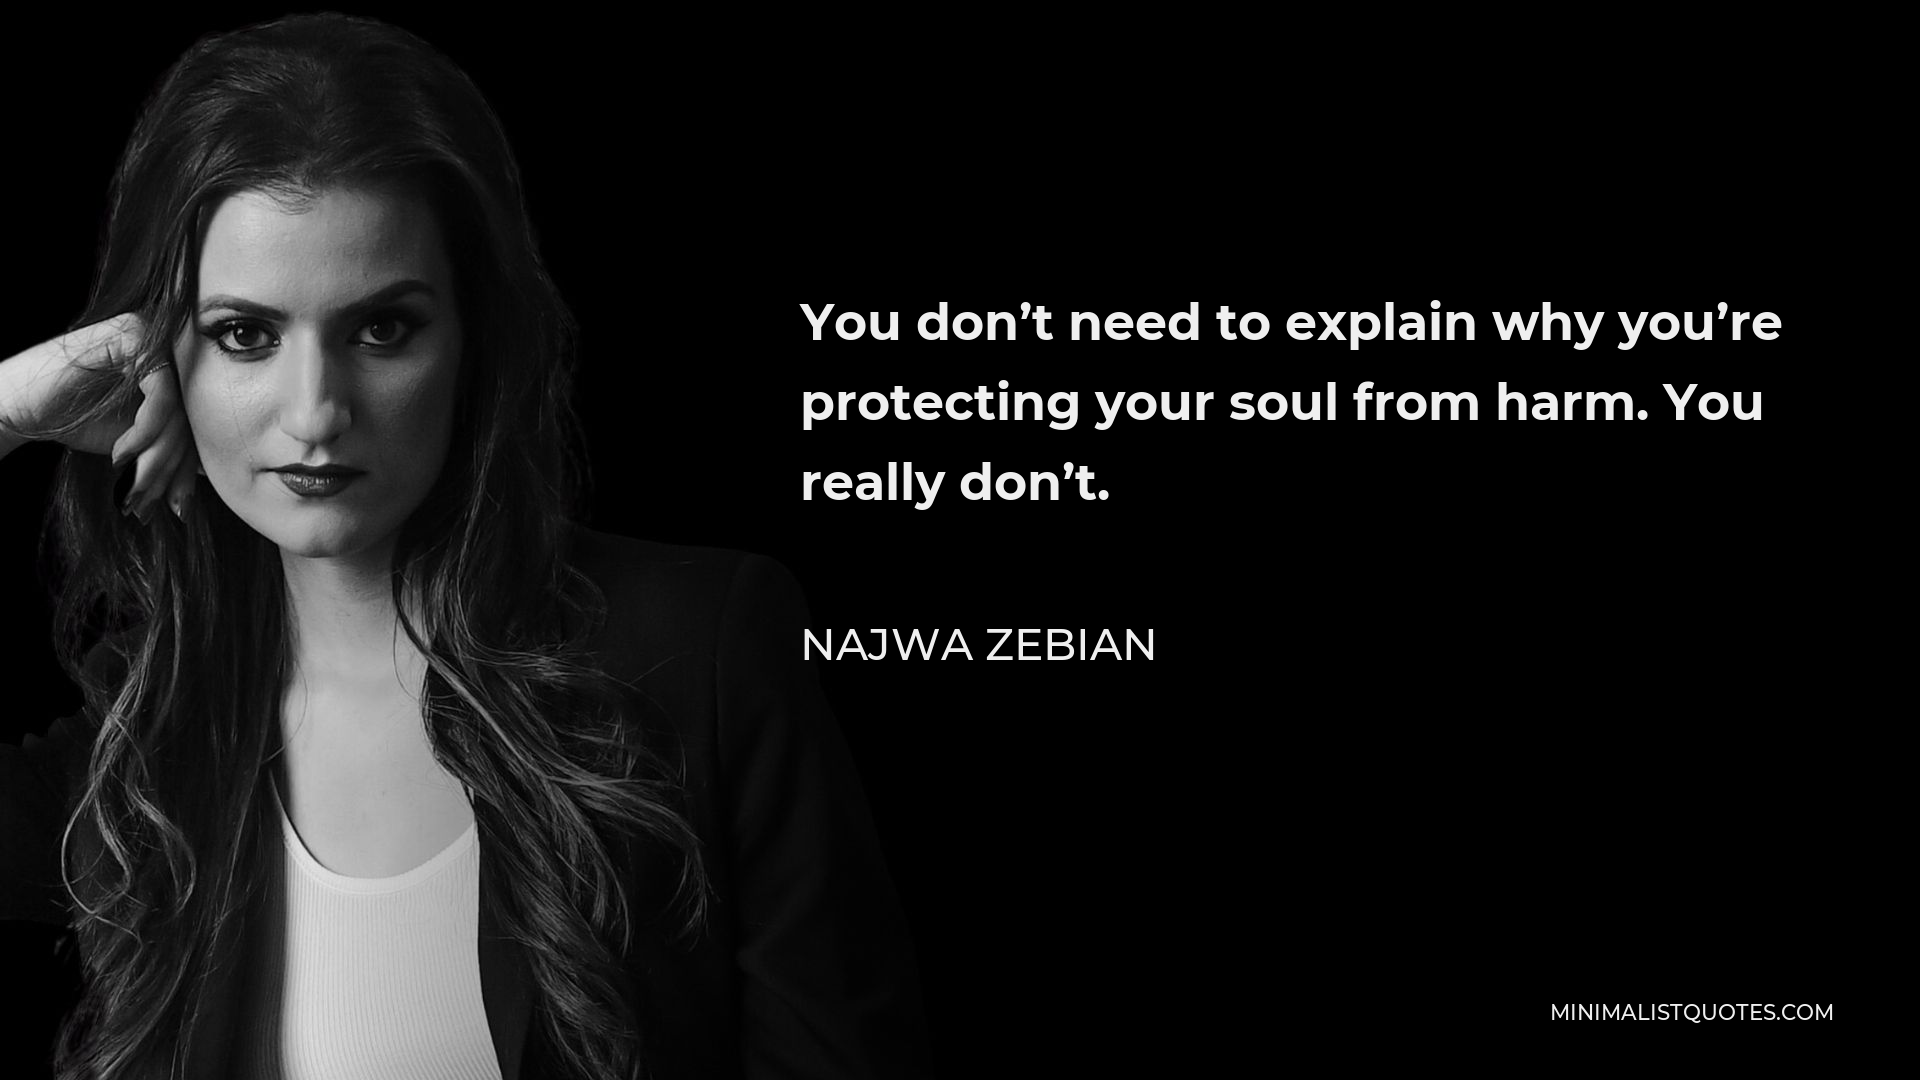 Najwa Zebian Quote - You don’t need to explain why you’re protecting your soul from harm. You really don’t.